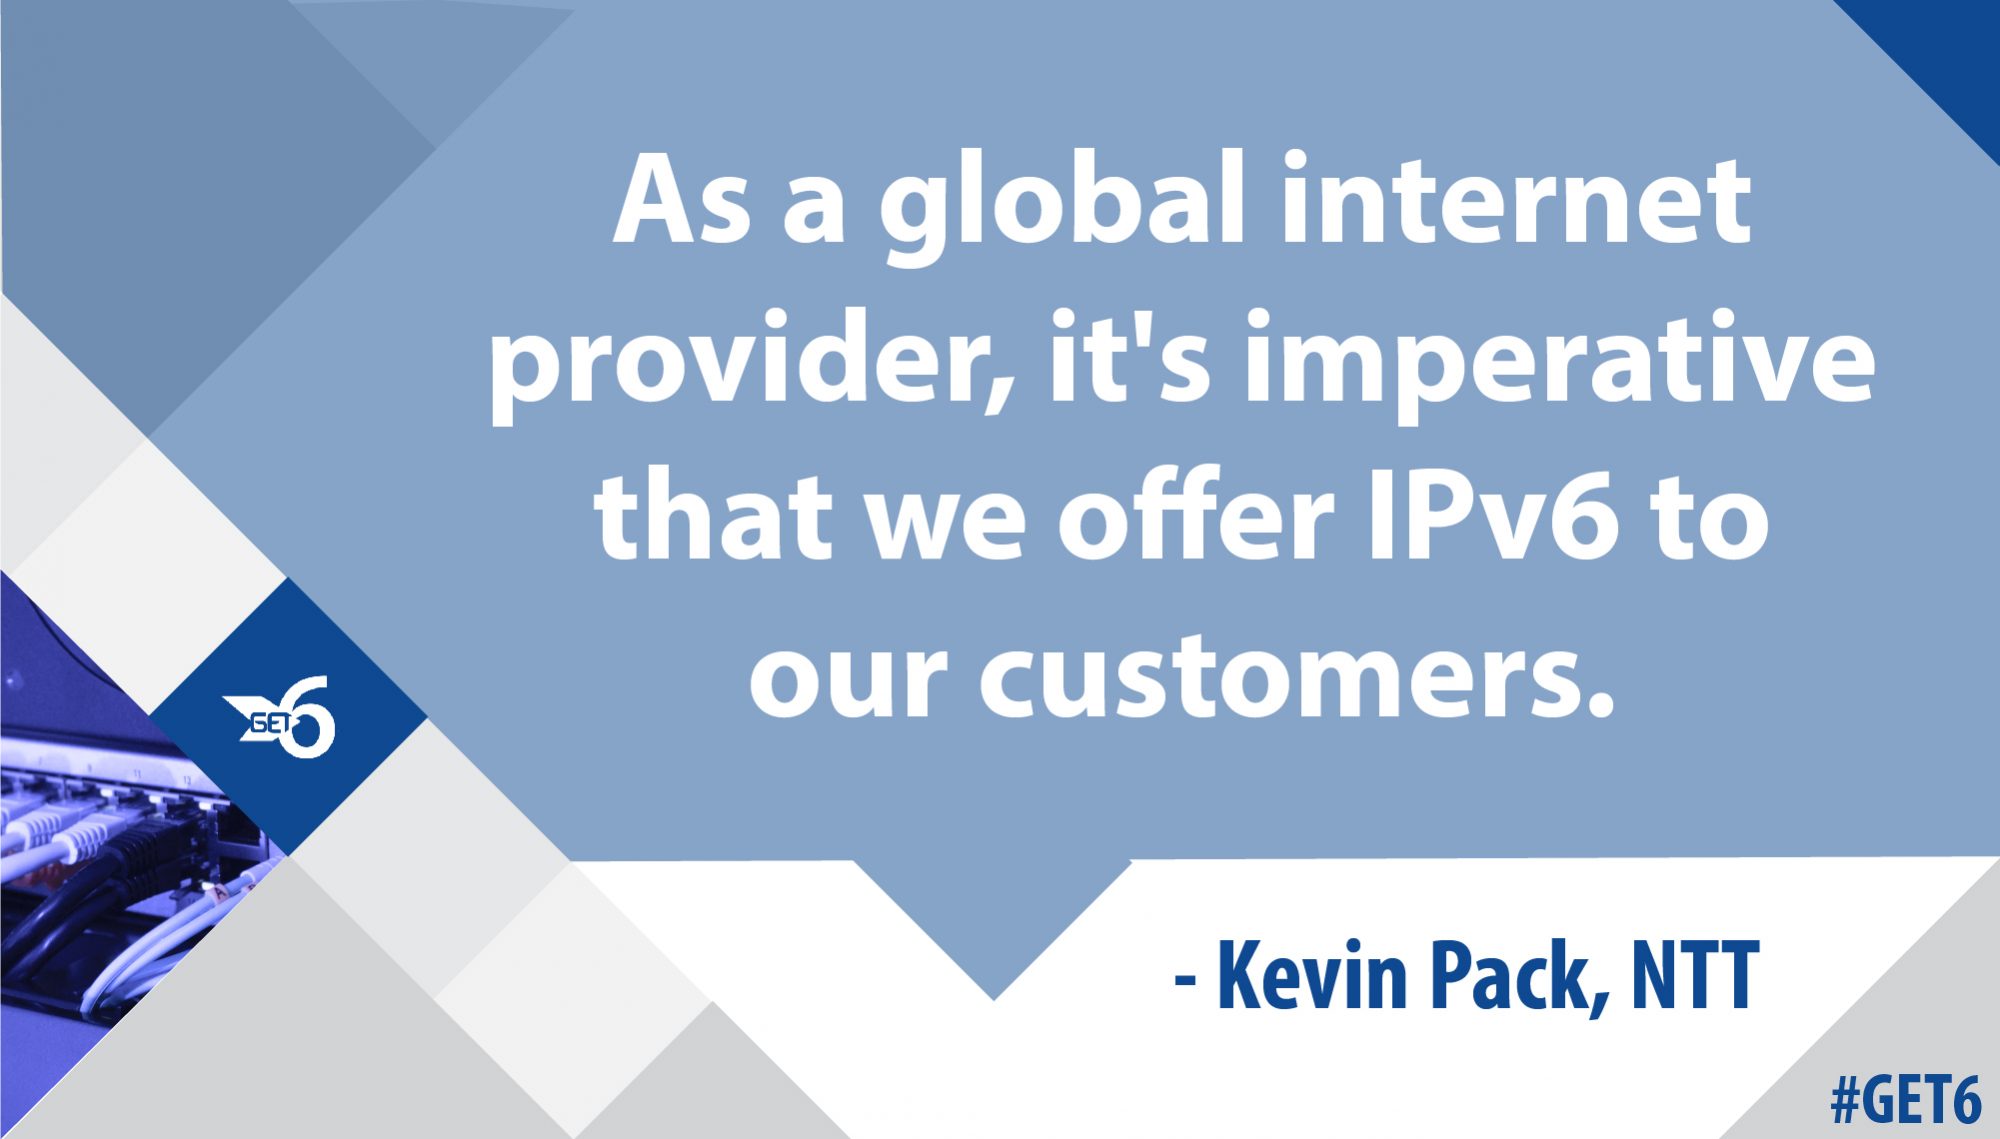 “As a global internet provider, it’s imperative that we offer IPv6 to our customers.